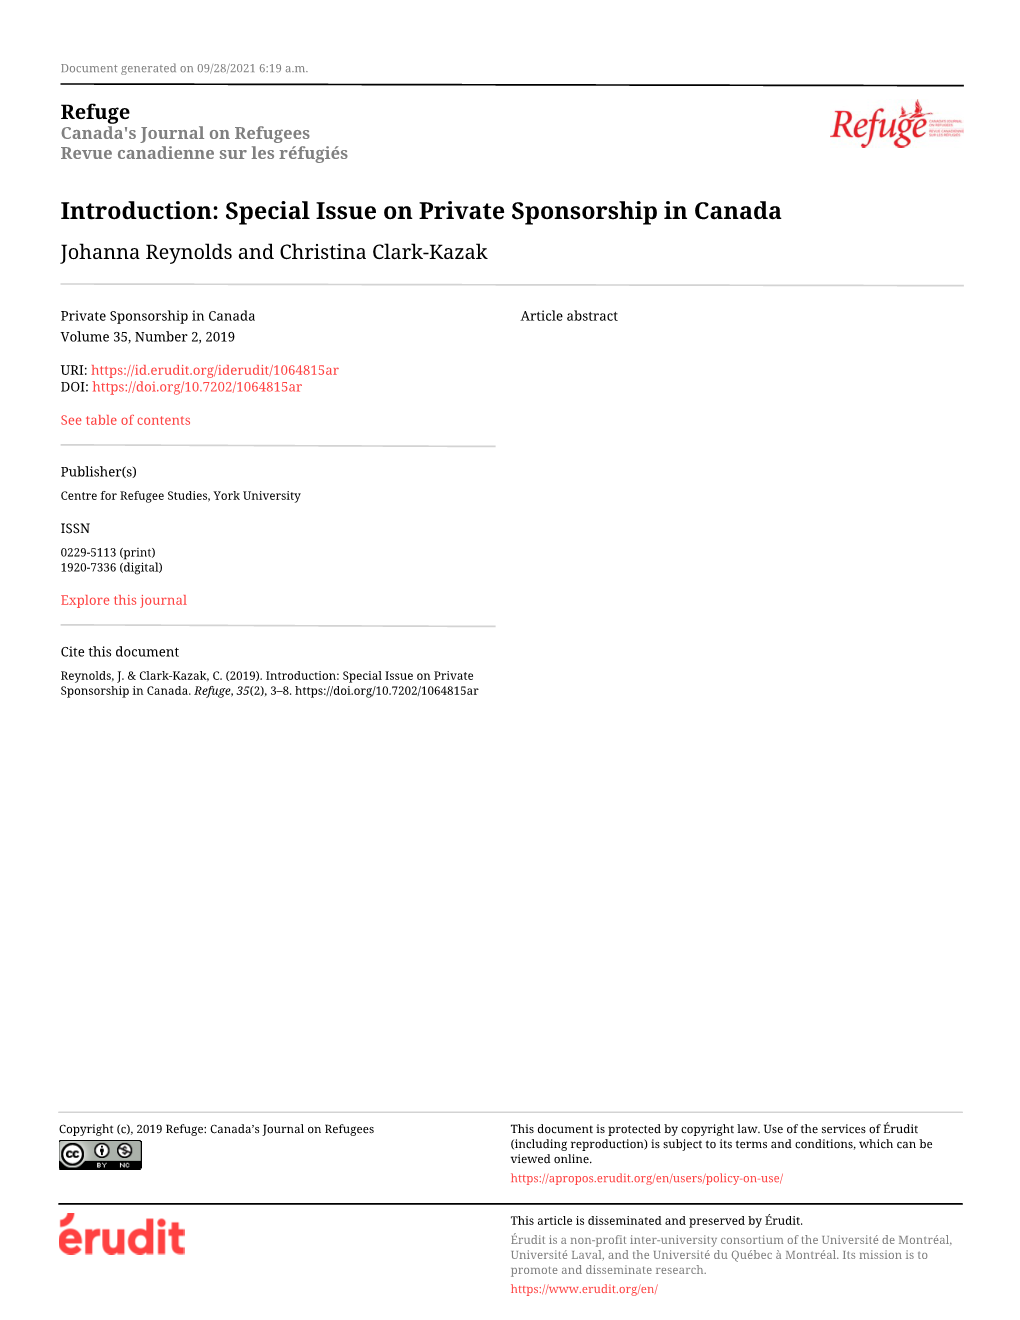 Special Issue on Private Sponsorship in Canada Johanna Reynolds and Christina Clark-Kazak